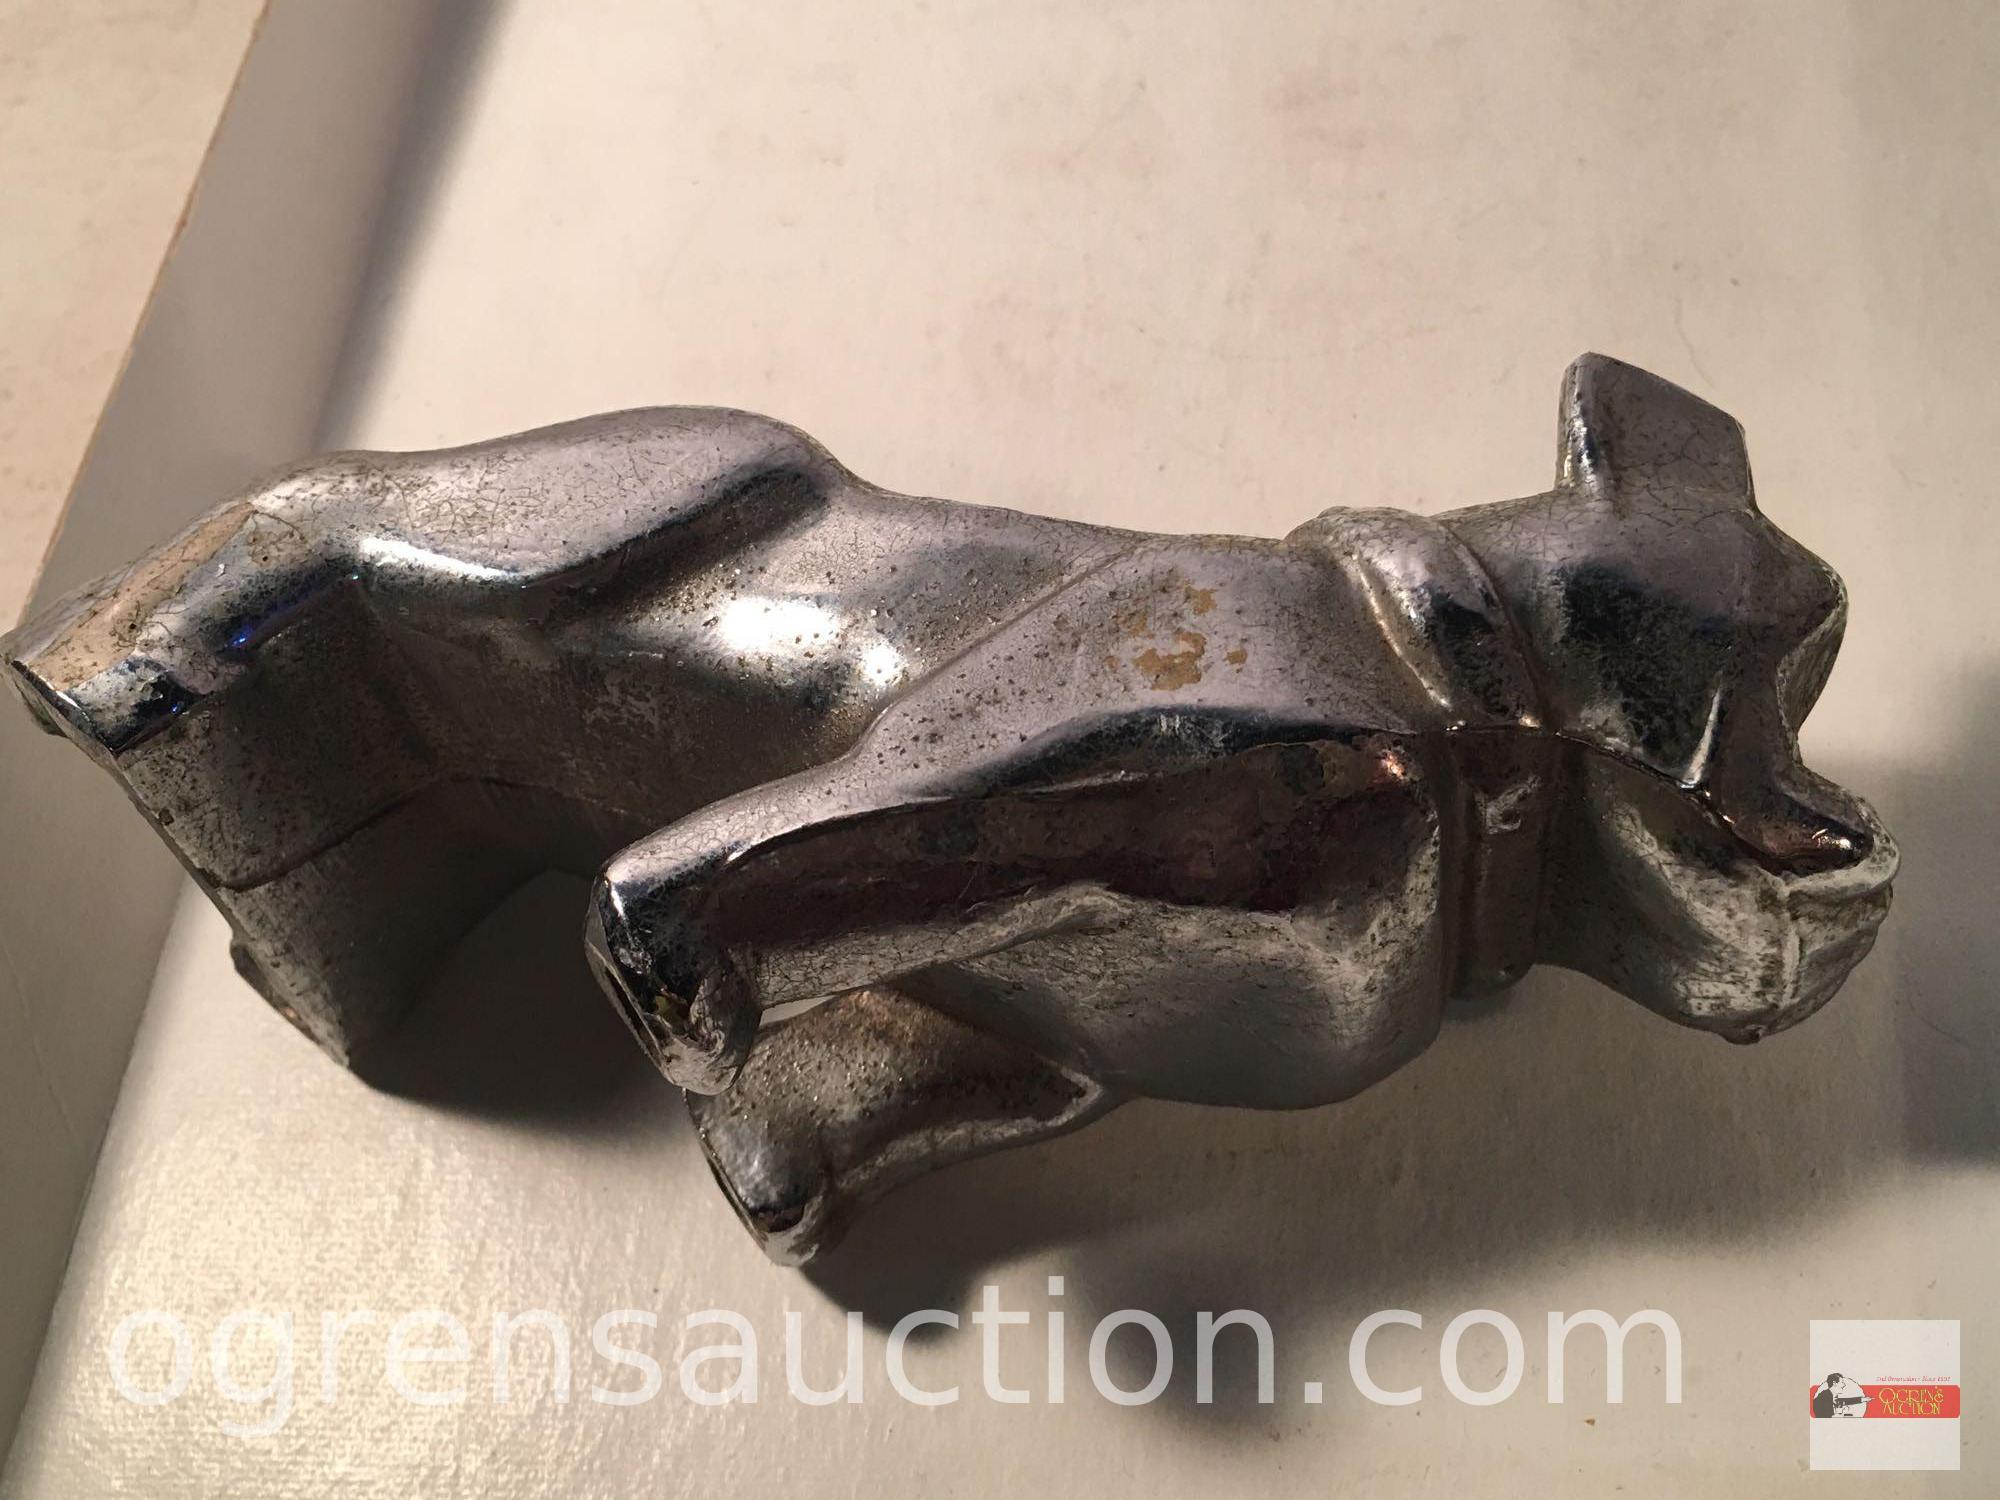 Collectibles - 3 - Mac Bull Dog hood ornament, Ronson Crown table lighter and vintage letter opener